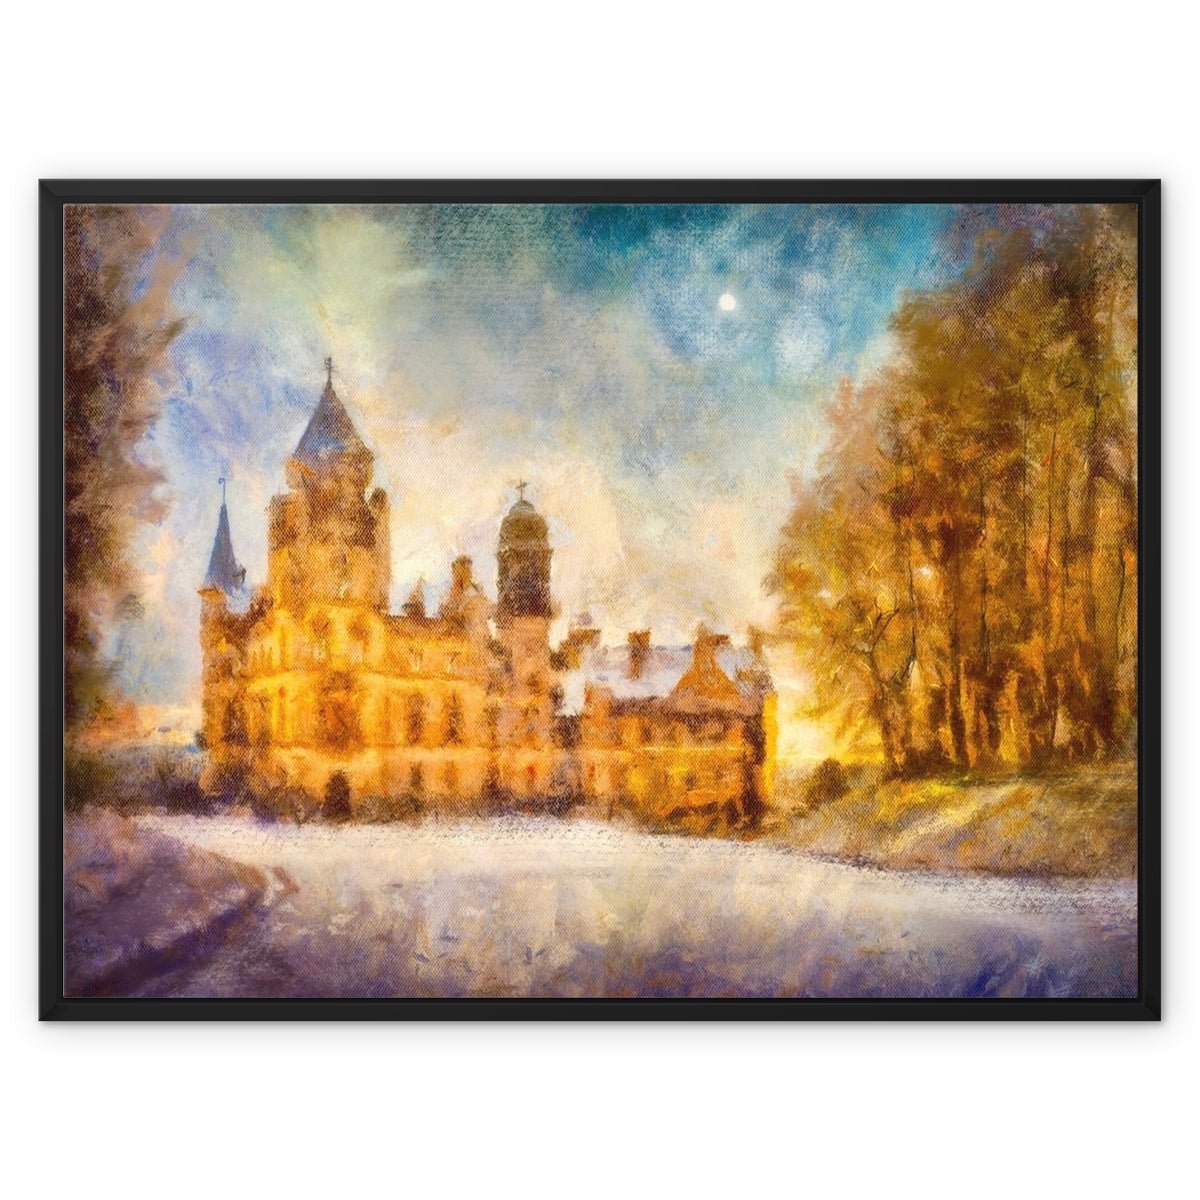 Dunrobin Castle Moonlight Painting | Framed Canvas From Scotland-Floating Framed Canvas Prints-Historic & Iconic Scotland Art Gallery-32"x24"-Black Frame-Paintings, Prints, Homeware, Art Gifts From Scotland By Scottish Artist Kevin Hunter